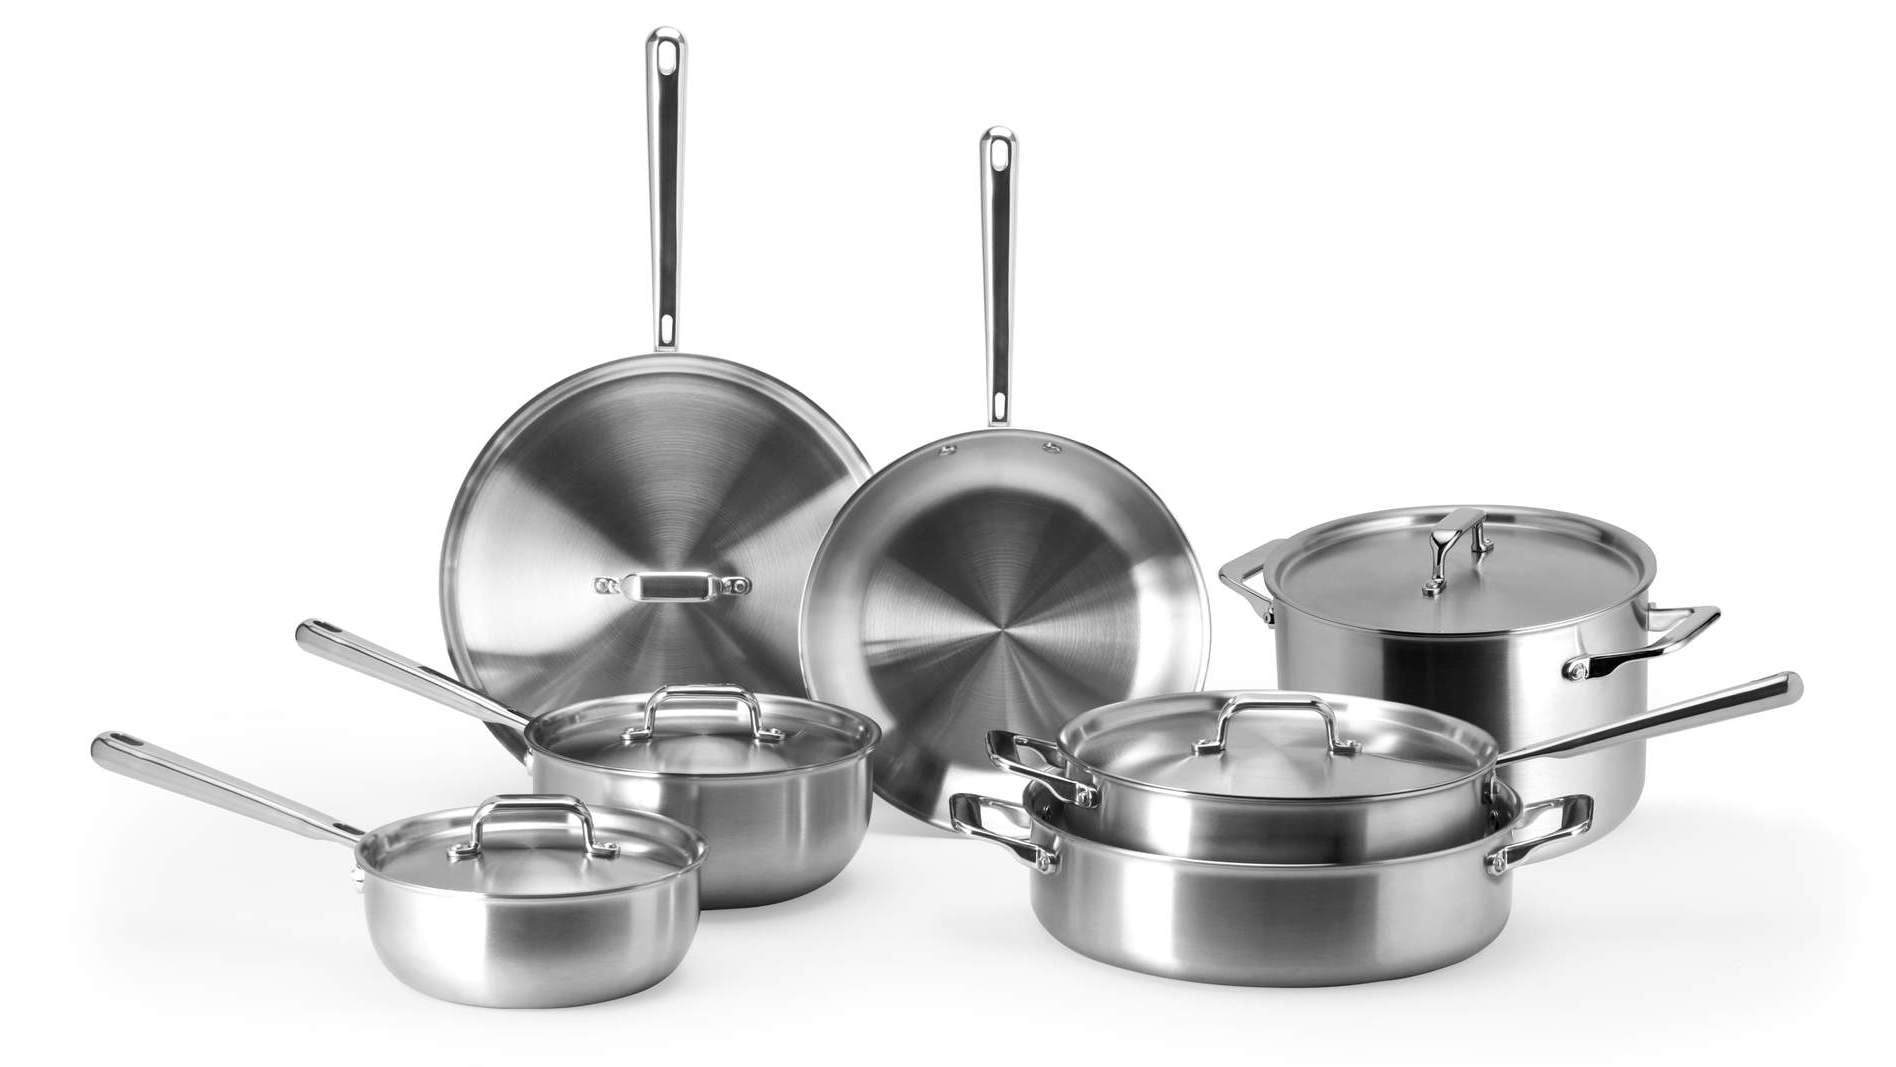 How to cook with stainless steel: the Misen complete stainless steel cookware set